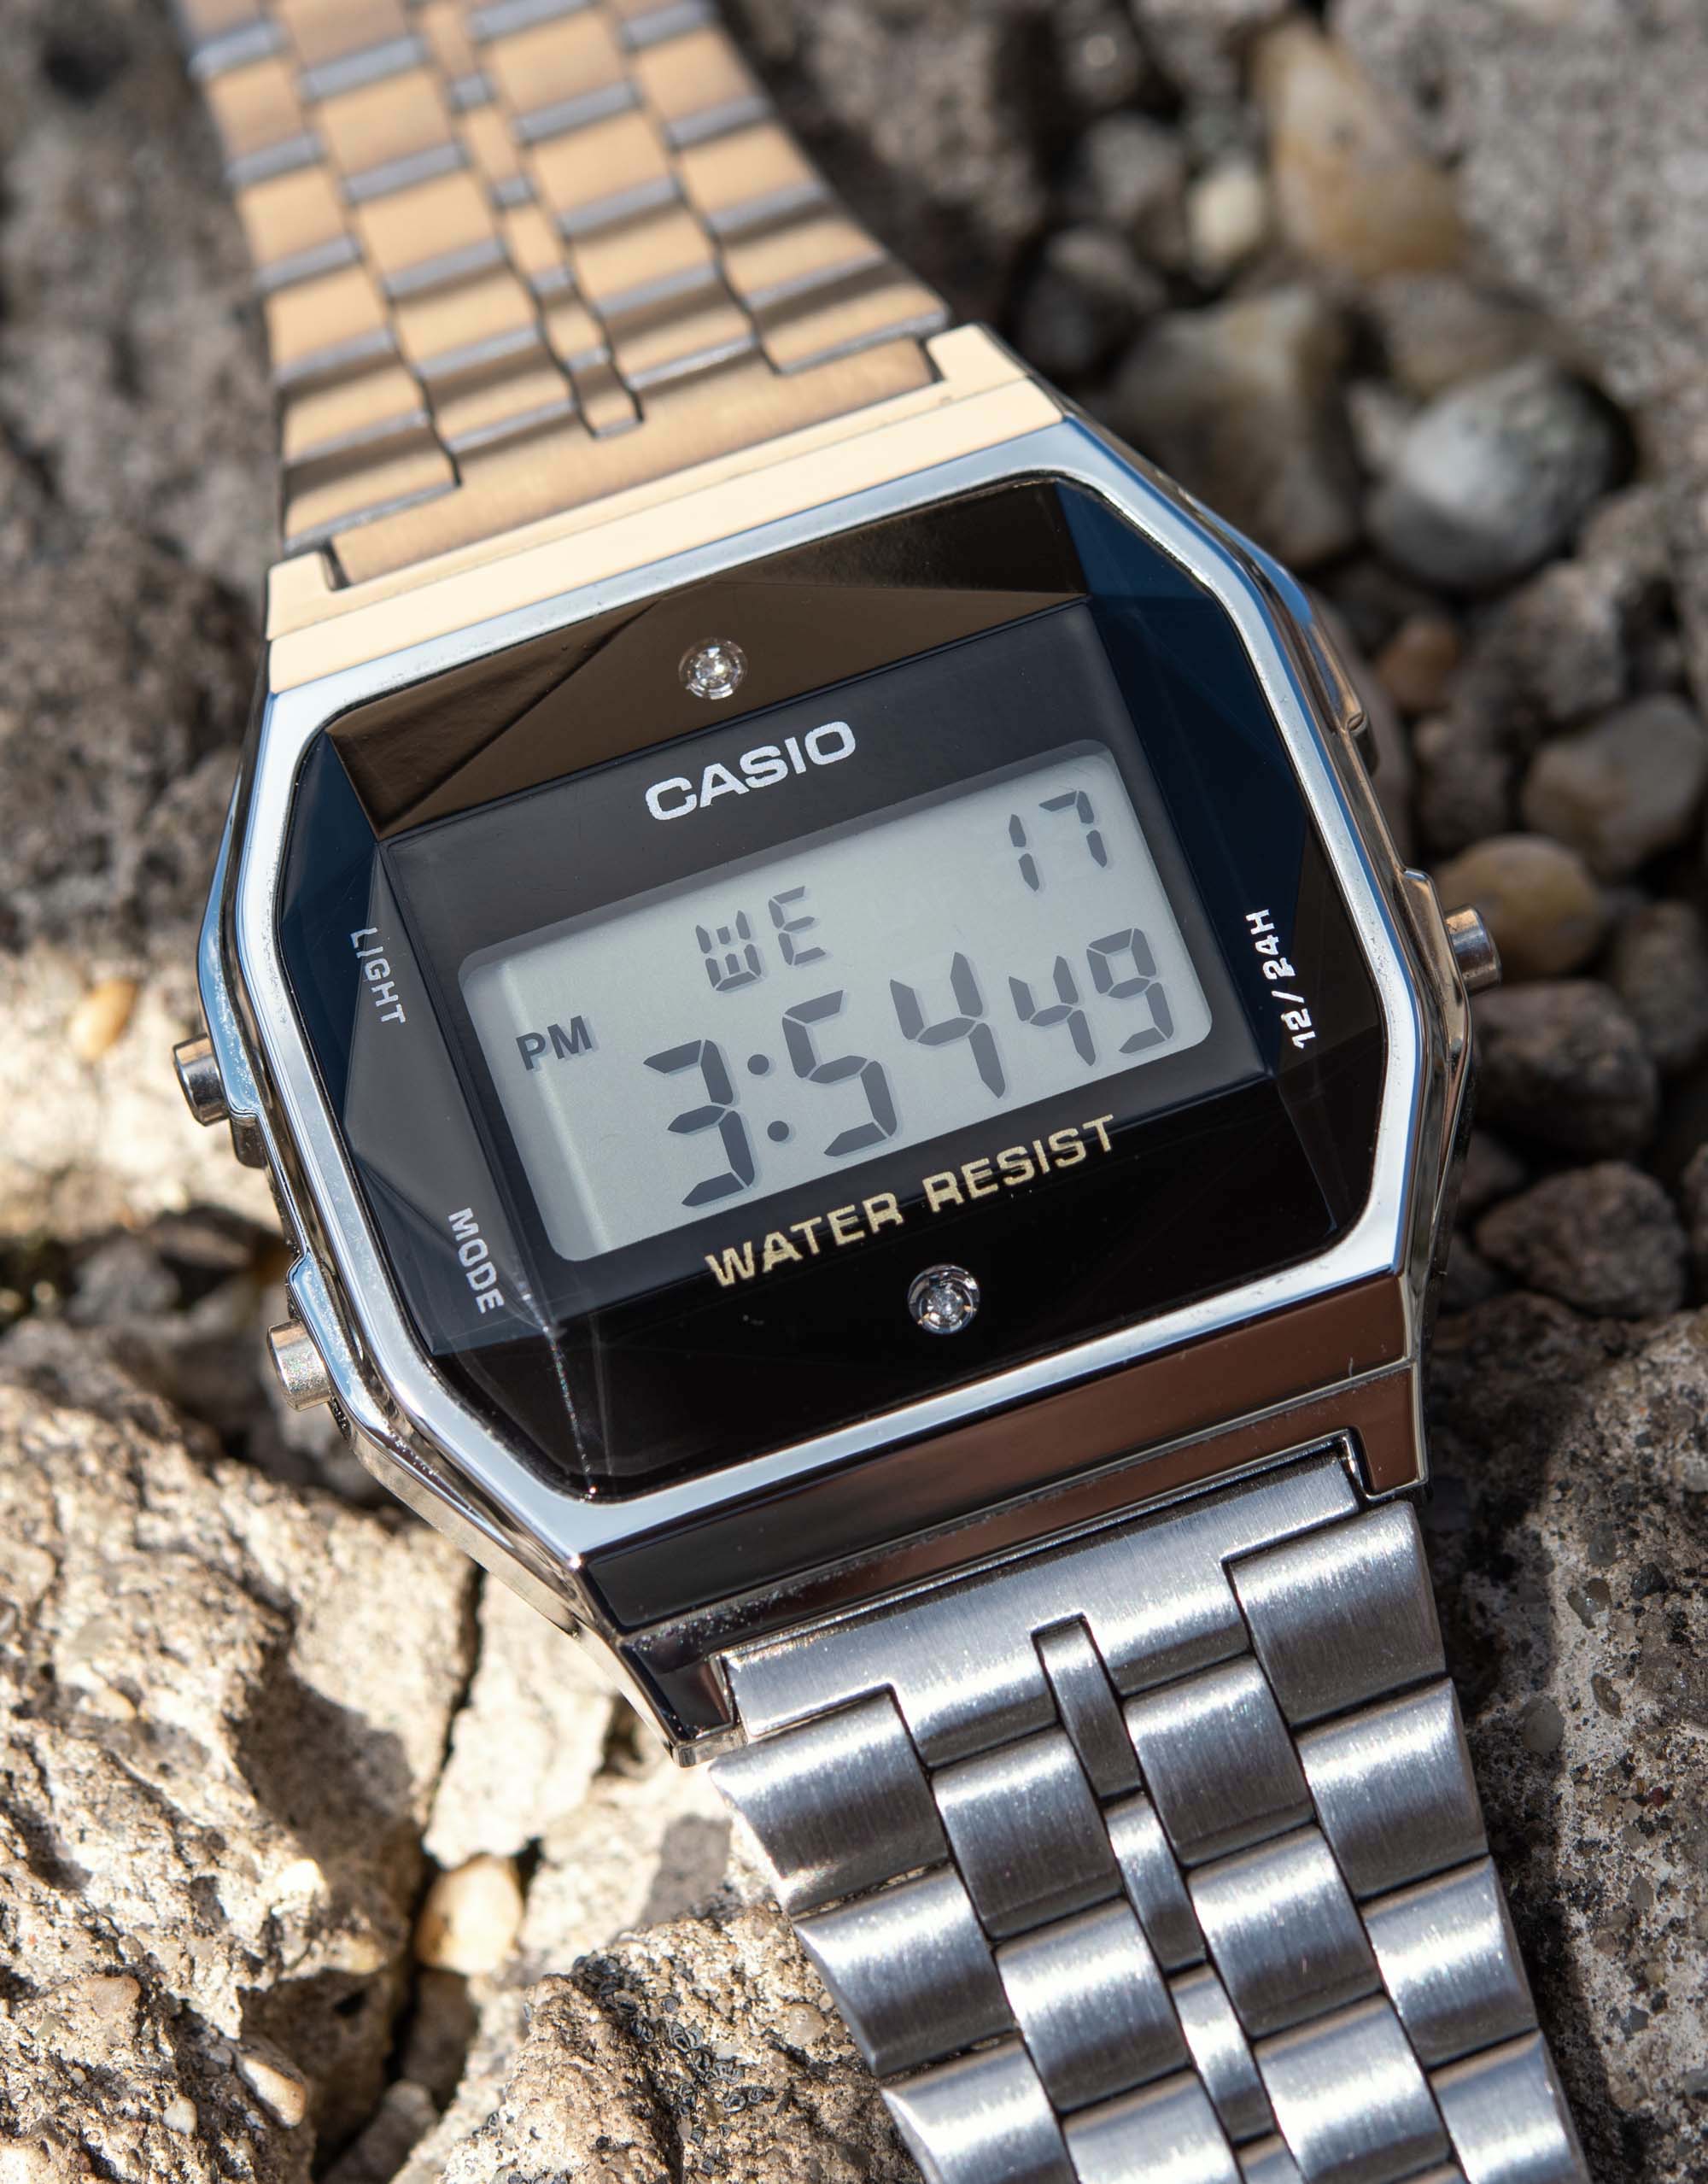 medeleerling kleding Franje Casio A159WAD-1D Watch Review: Should You Buy The Cheapest-Ever Diamond-Set  Watch? | aBlogtoWatch